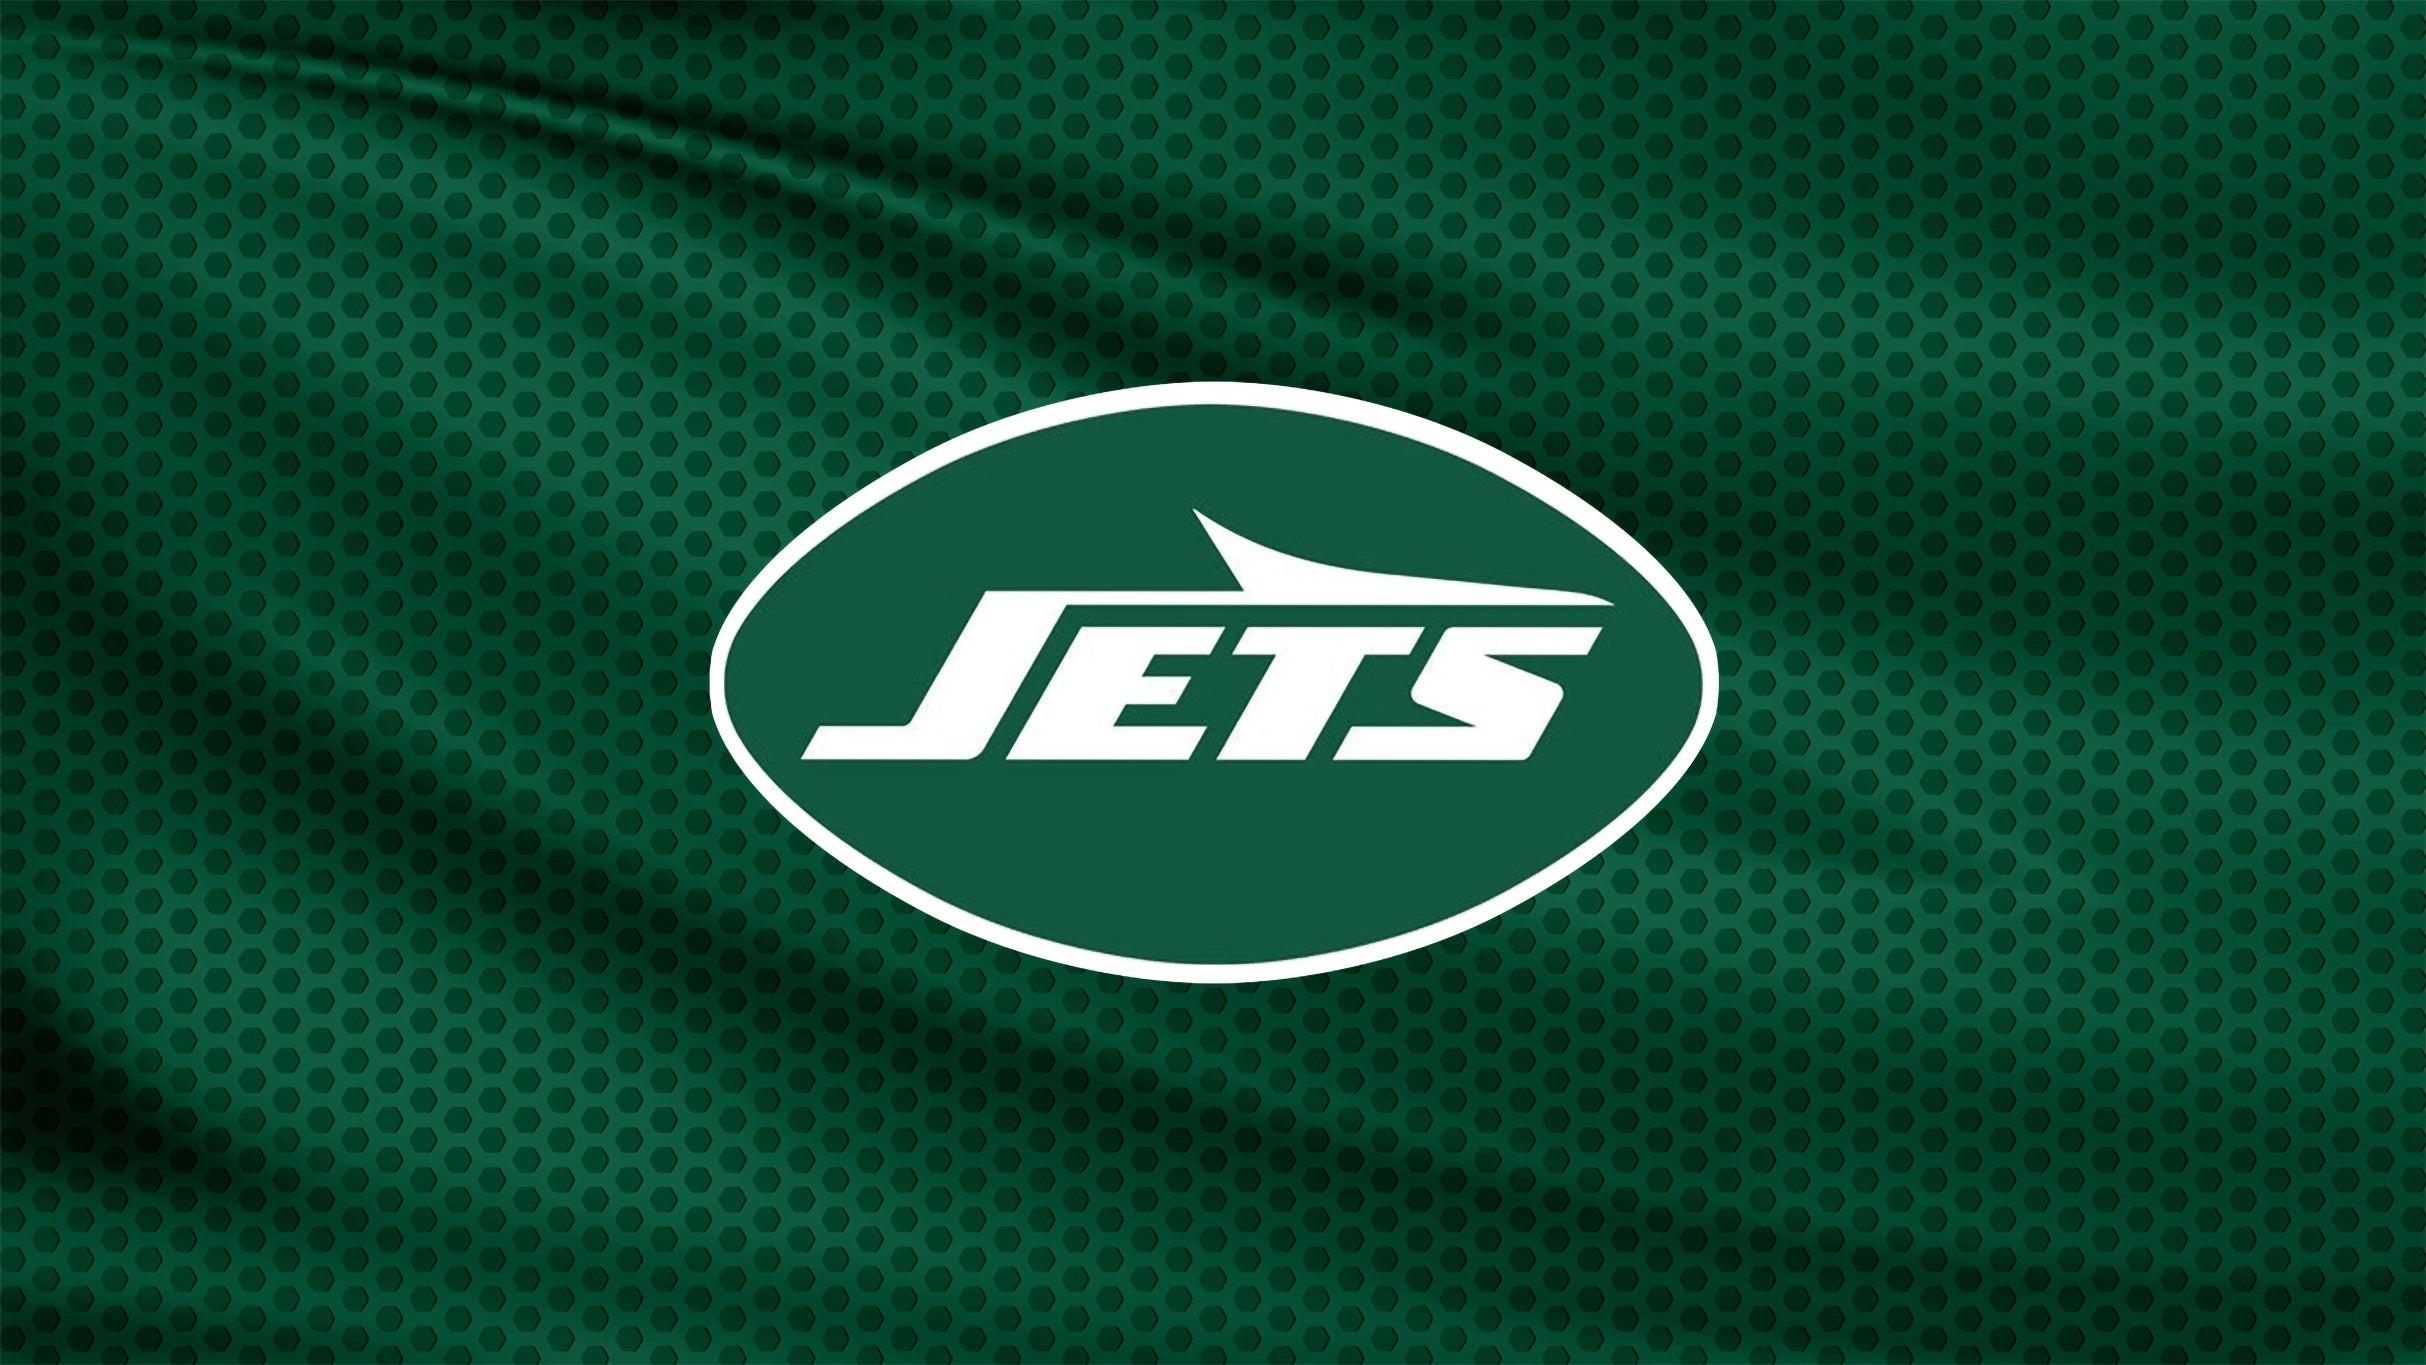 New York Jets vs. New England Patriots in East Rutherford promo photo for VISA presale offer code